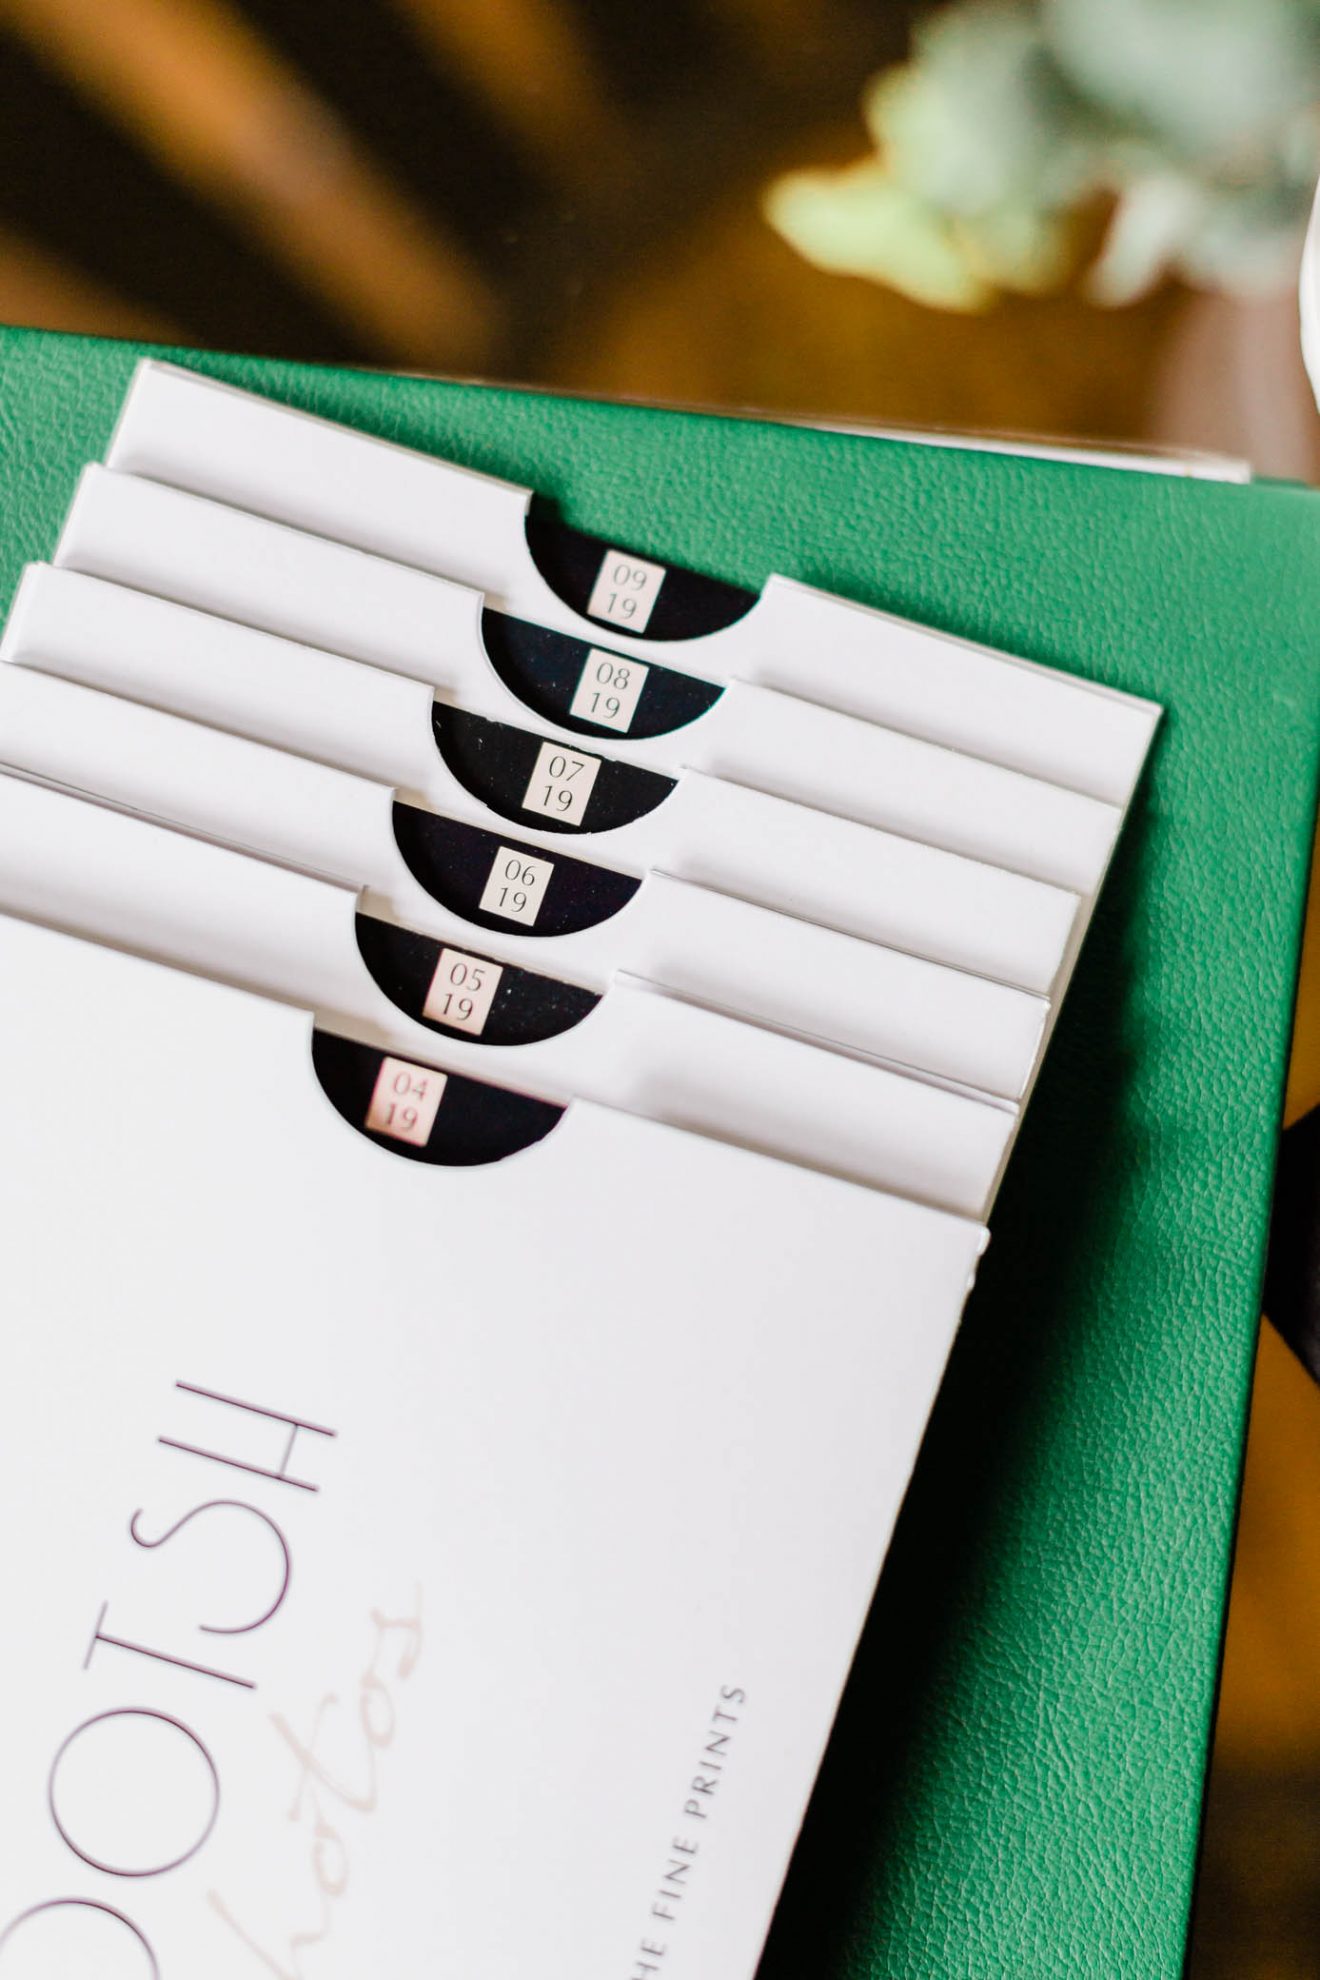 A stack of Mootsh envelopes laying on a table.